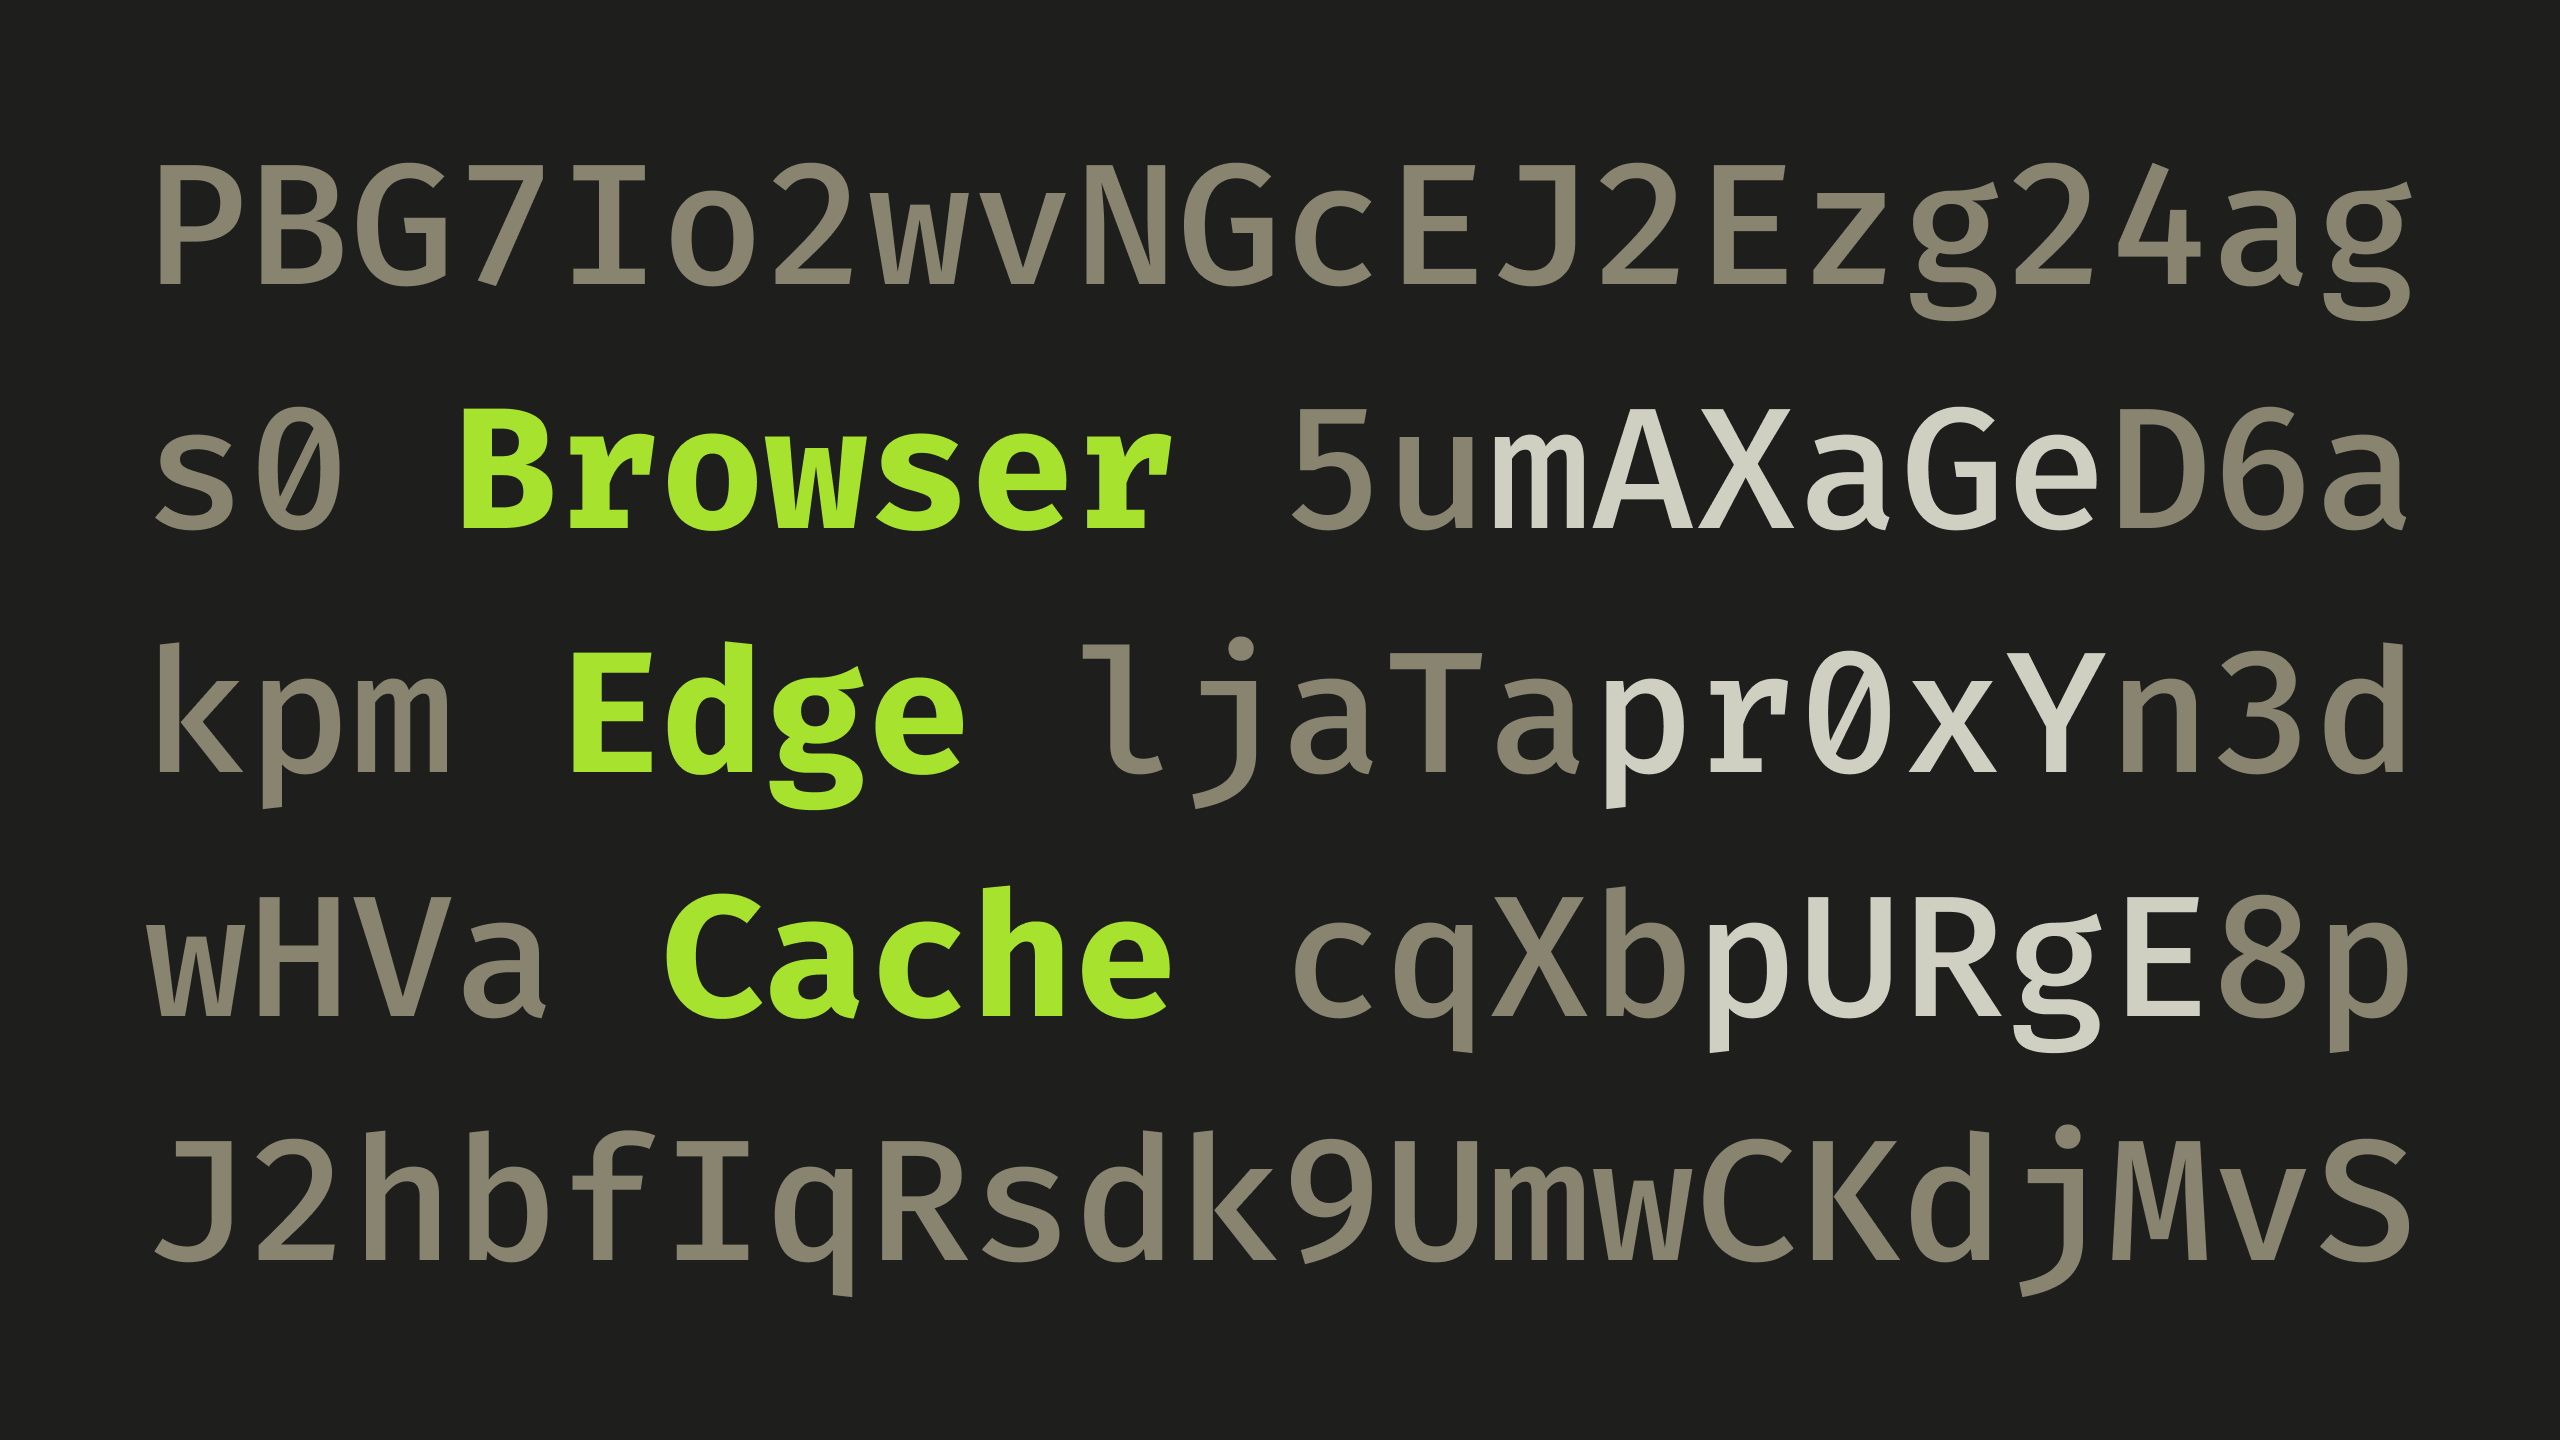 The words "Browser", "Edge", and "Cache", surrounded by random characters.